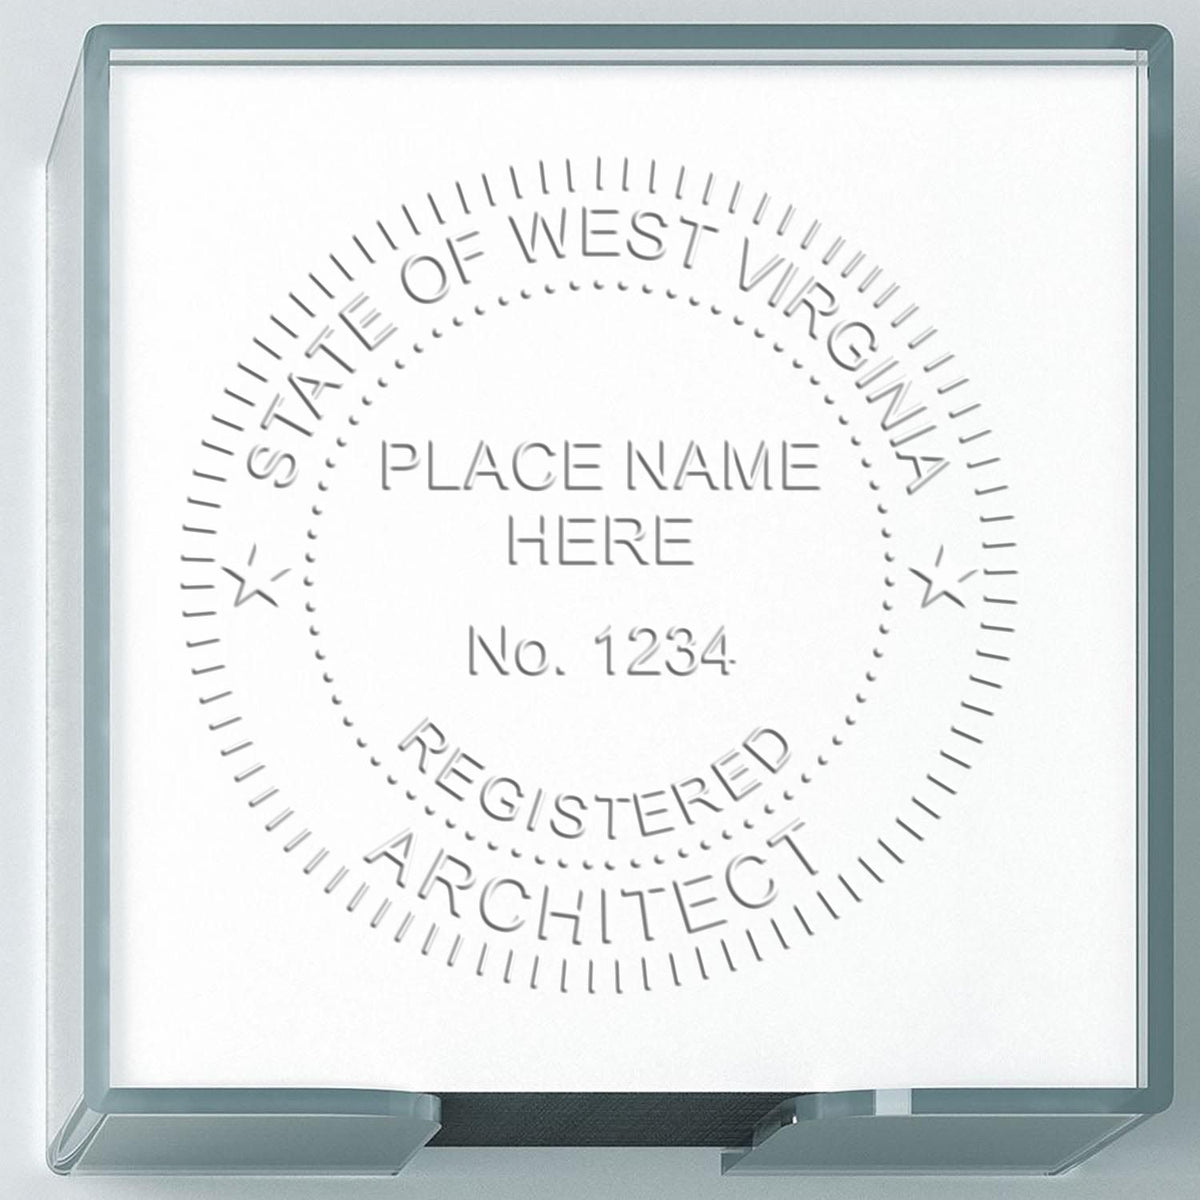 A stamped impression of the West Virginia Desk Architect Embossing Seal in this stylish lifestyle photo, setting the tone for a unique and personalized product.